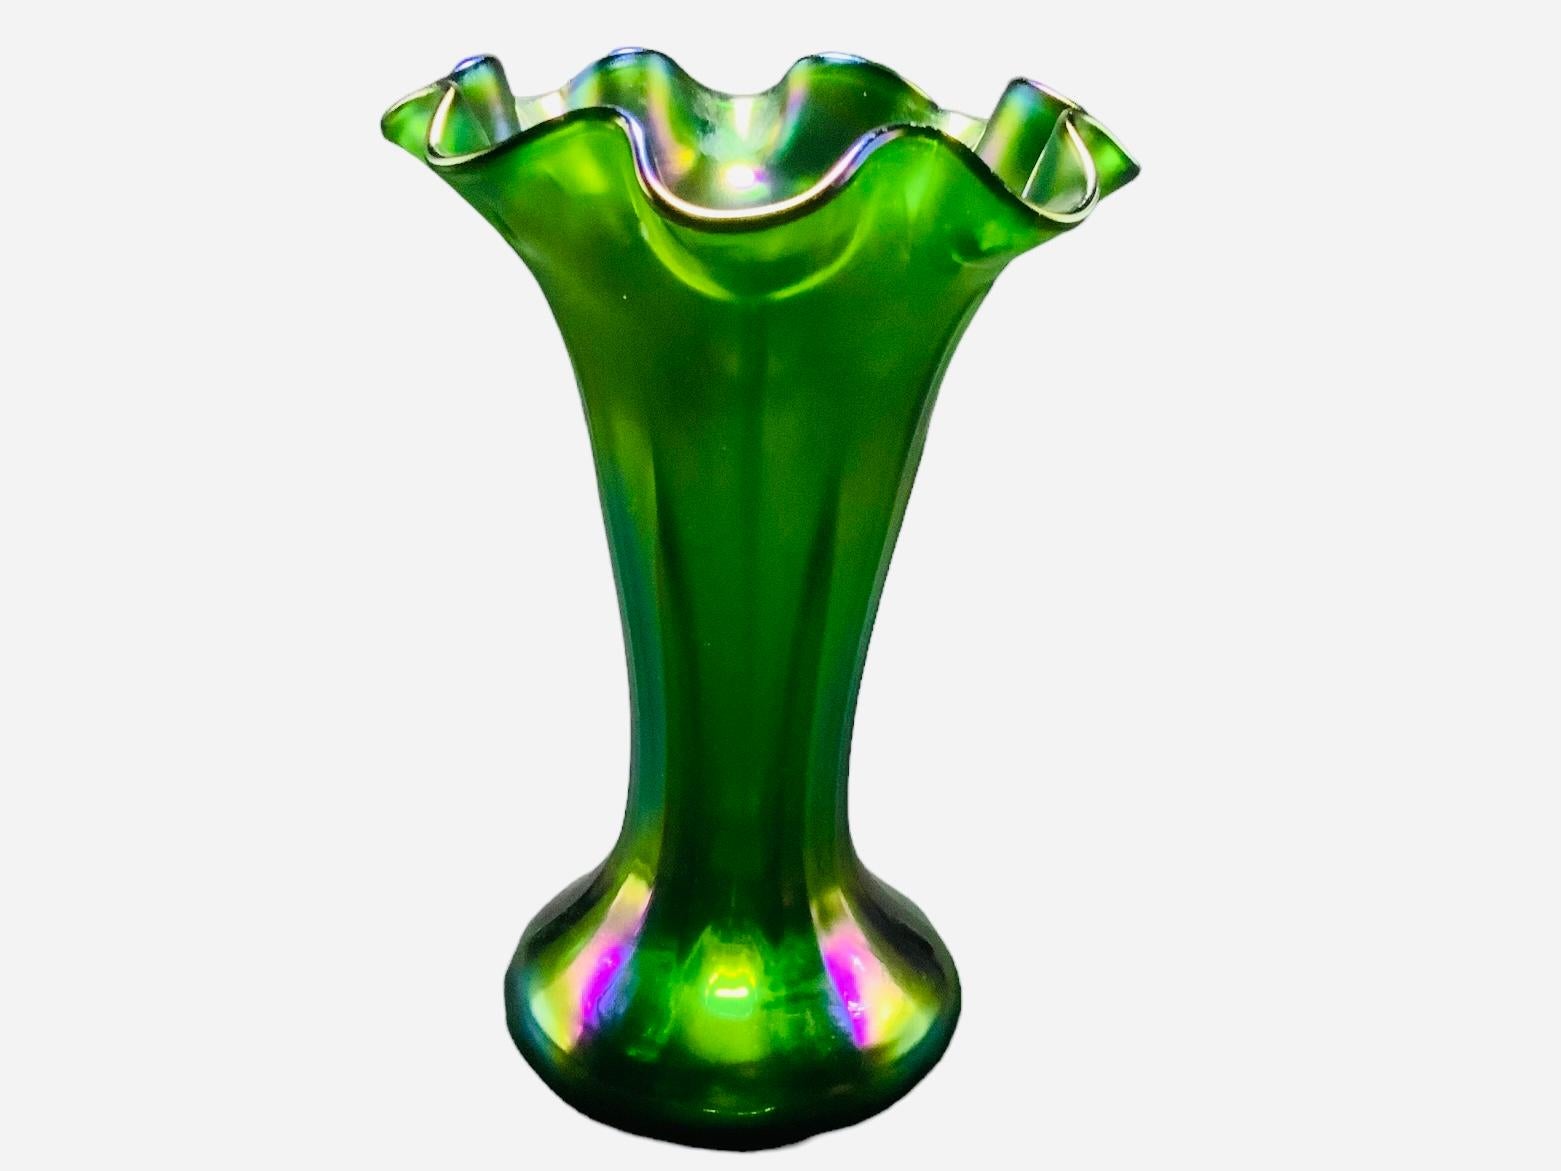 Small Iridescent Art Glass Flower Vase In Good Condition For Sale In Guaynabo, PR